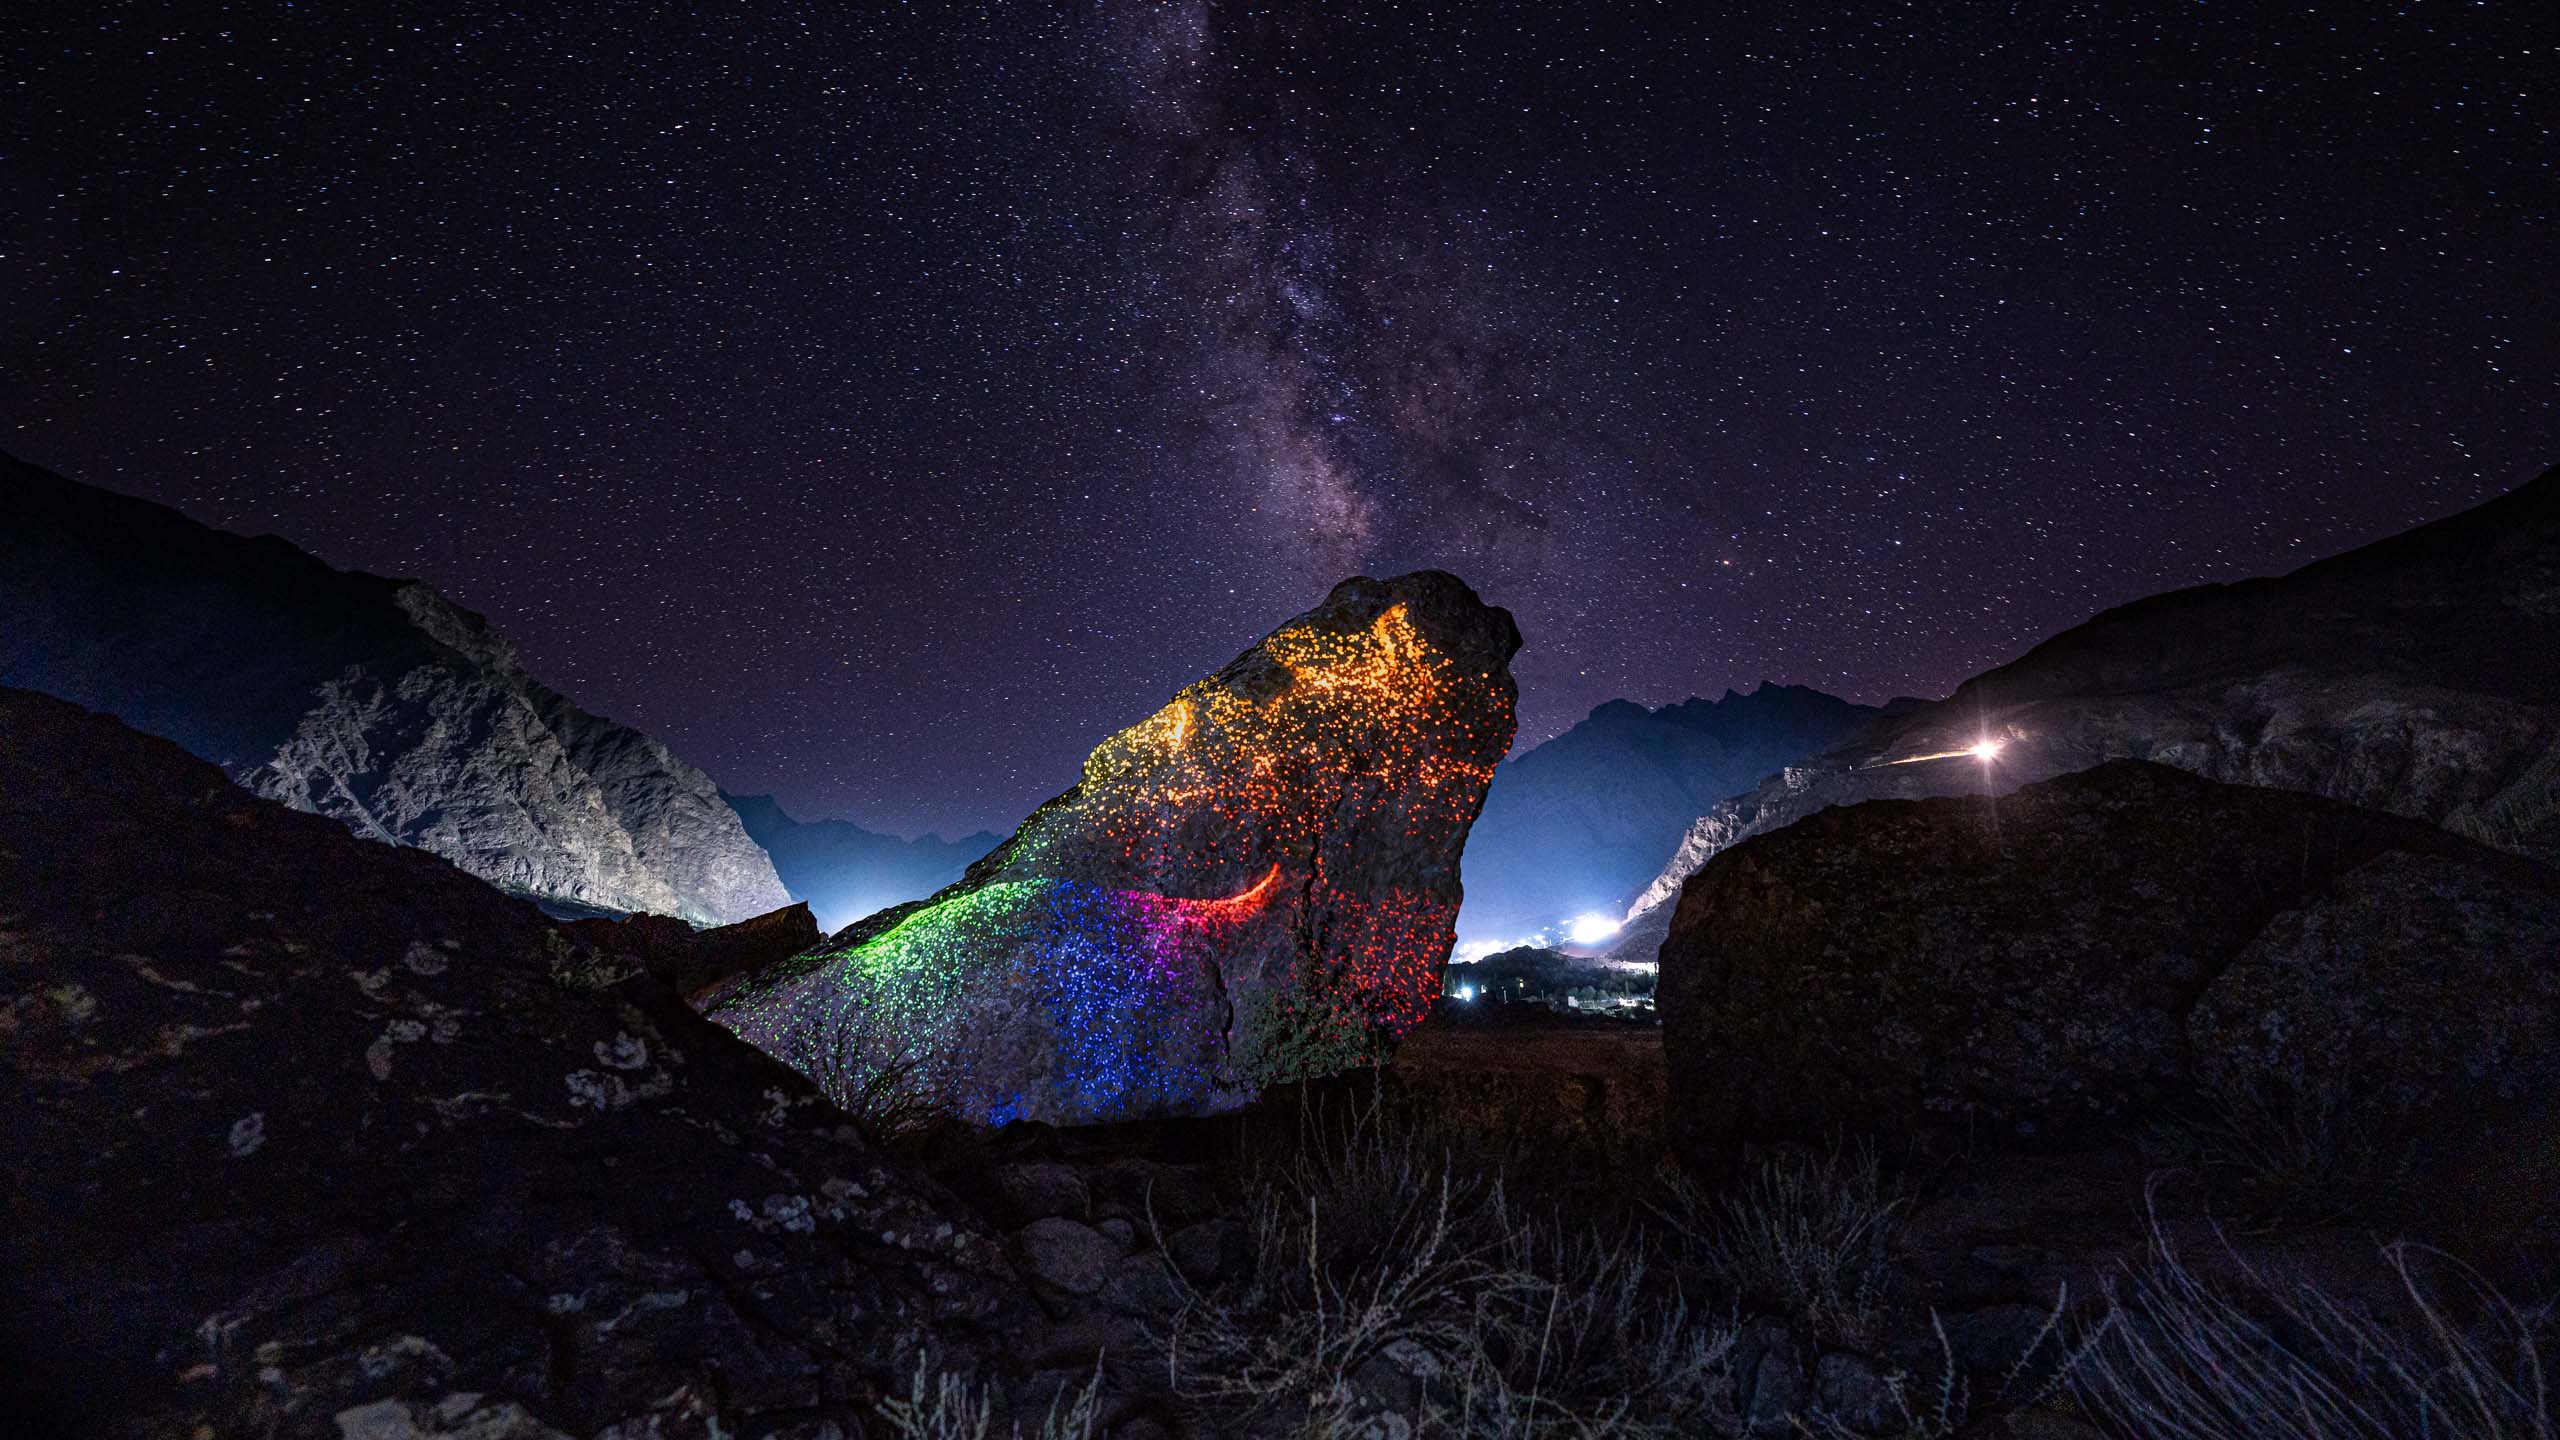 Colorful land-art installation at night on a boulder with milky way in the night sky in Ladakh, Himalaya